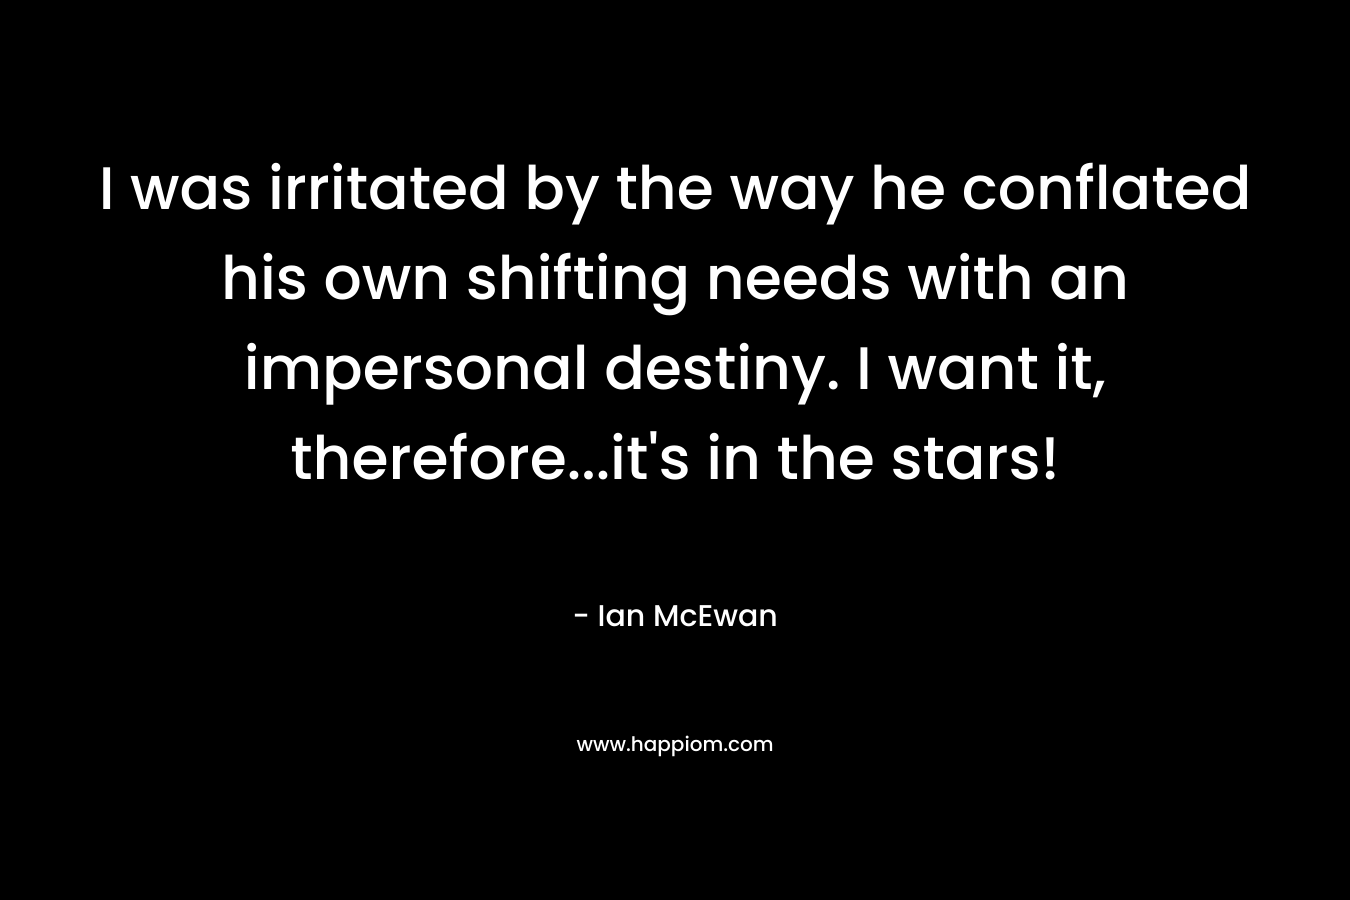 I was irritated by the way he conflated his own shifting needs with an impersonal destiny. I want it, therefore…it’s in the stars! – Ian McEwan